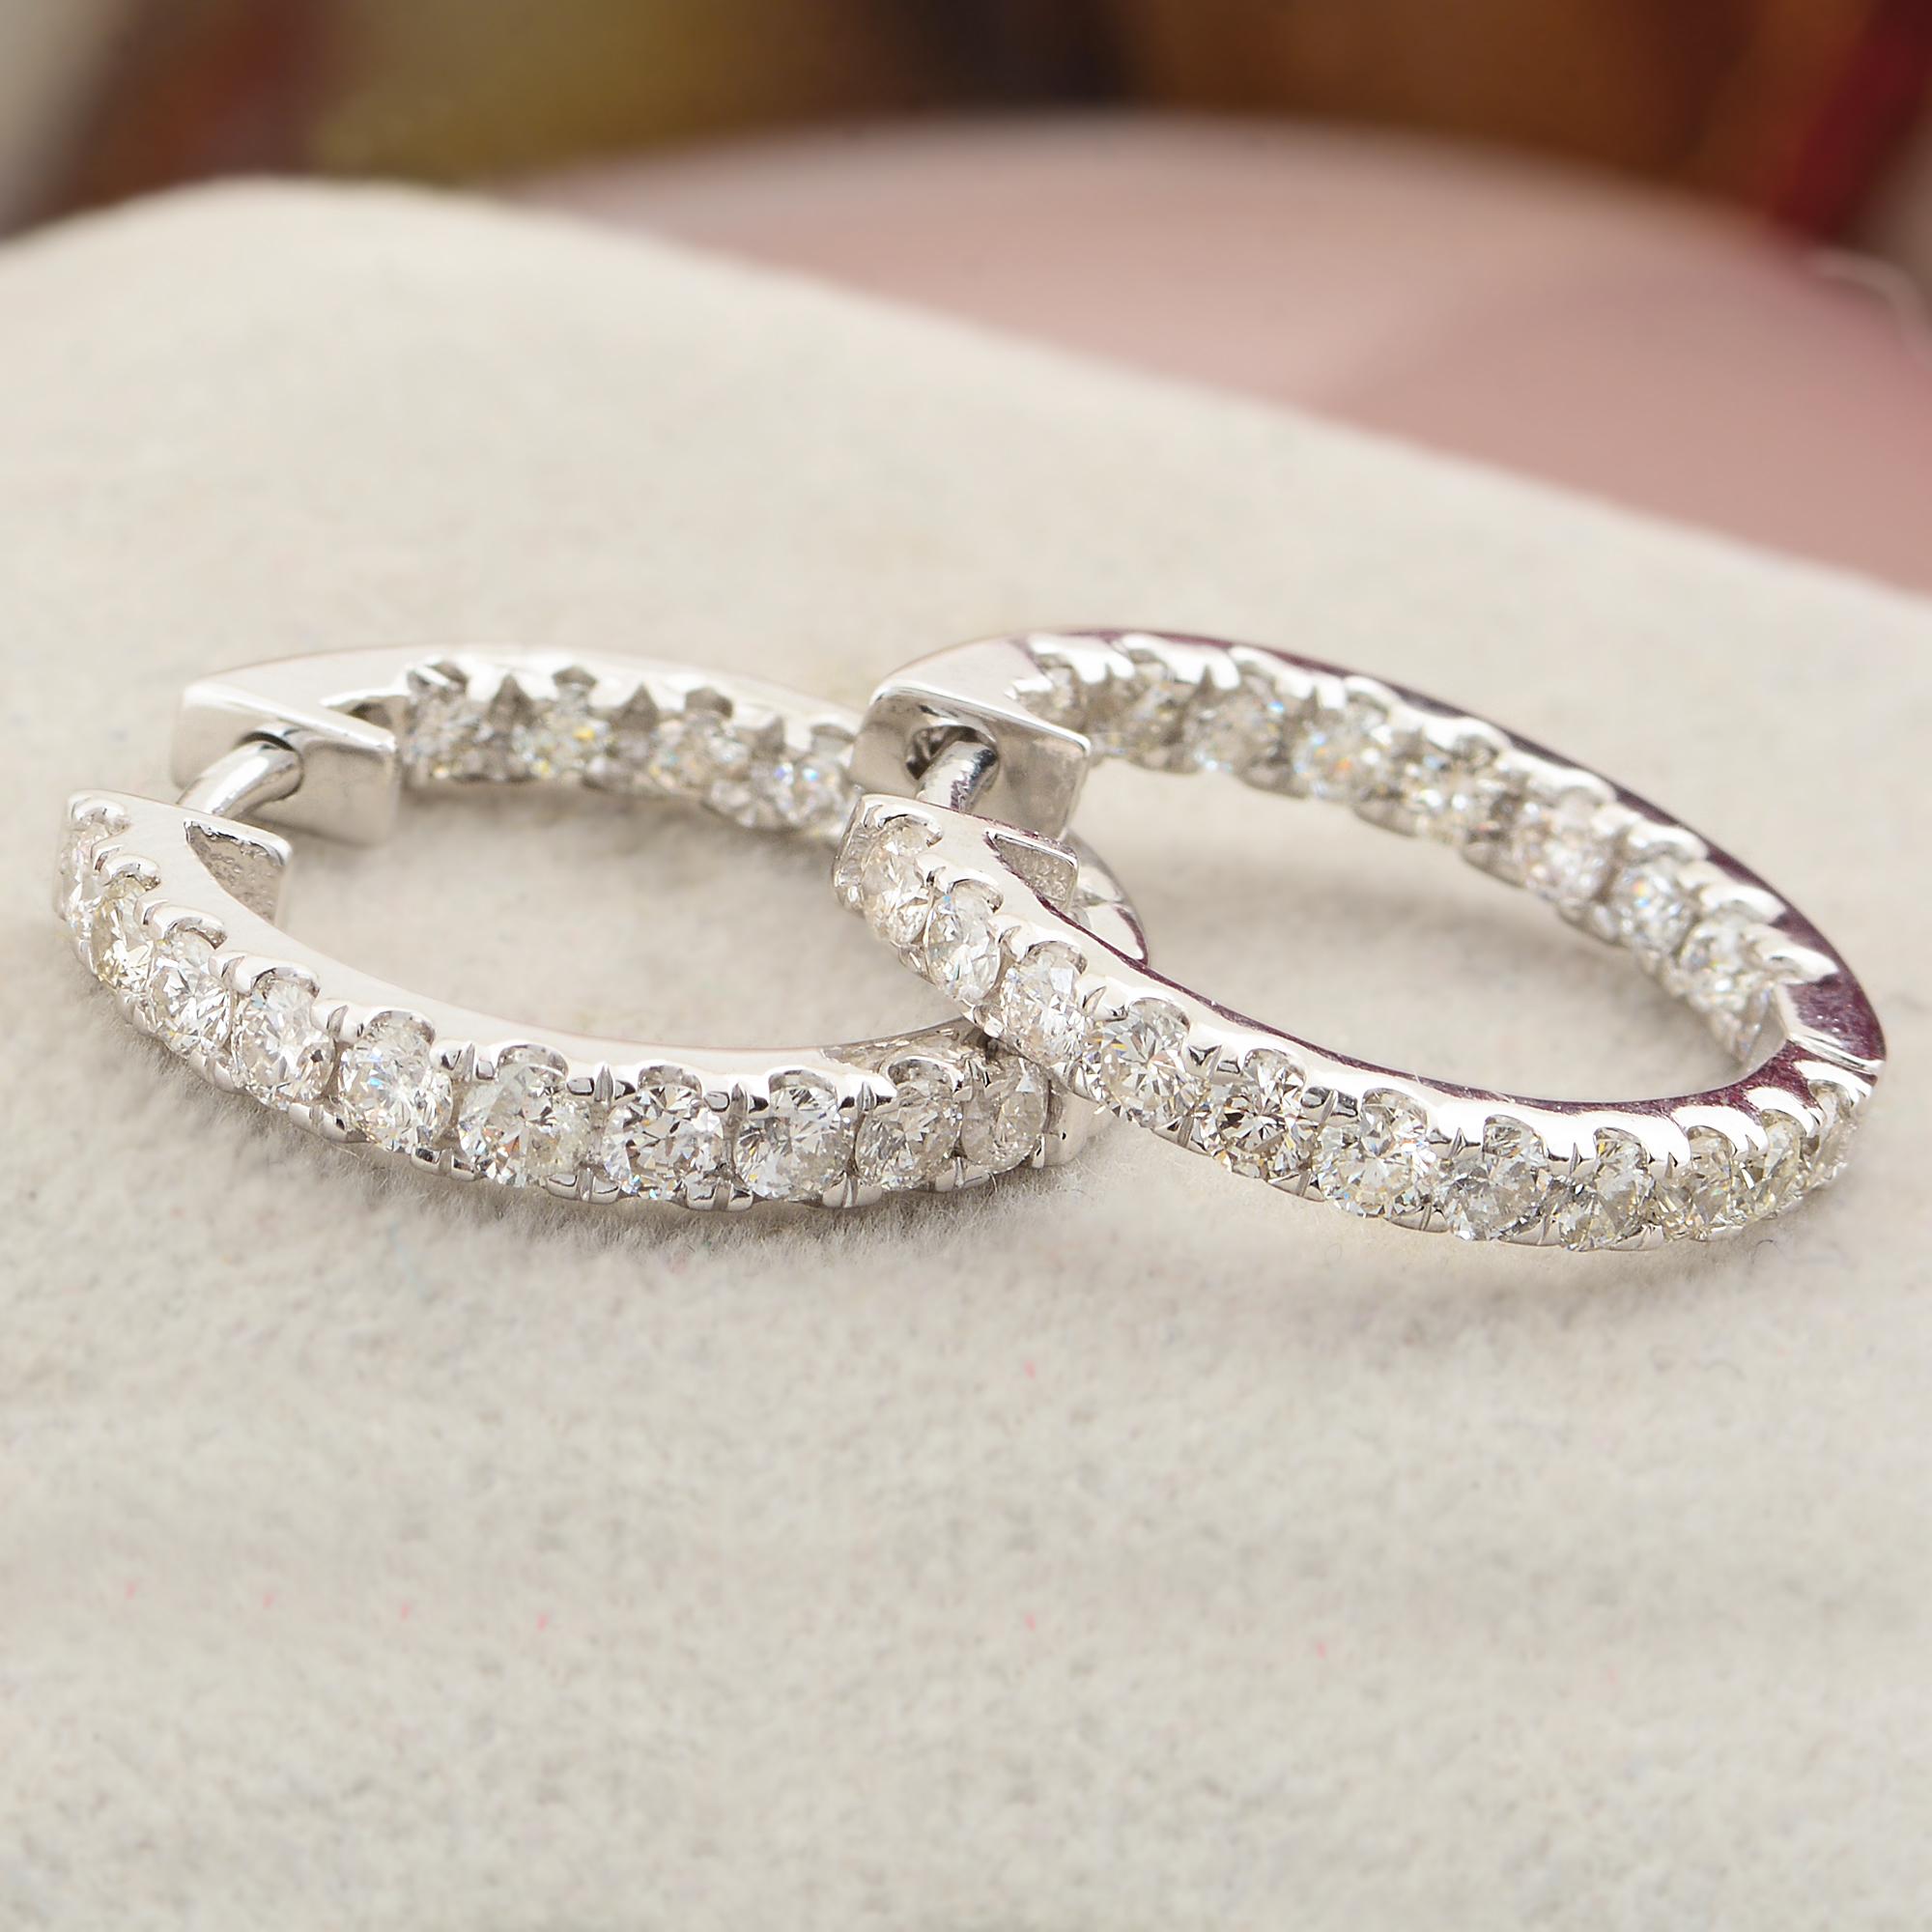 Modern 1.15 Carat SI Clarity HI Color Diamond Pave Hoop Earrings 10k White Gold Jewelry For Sale